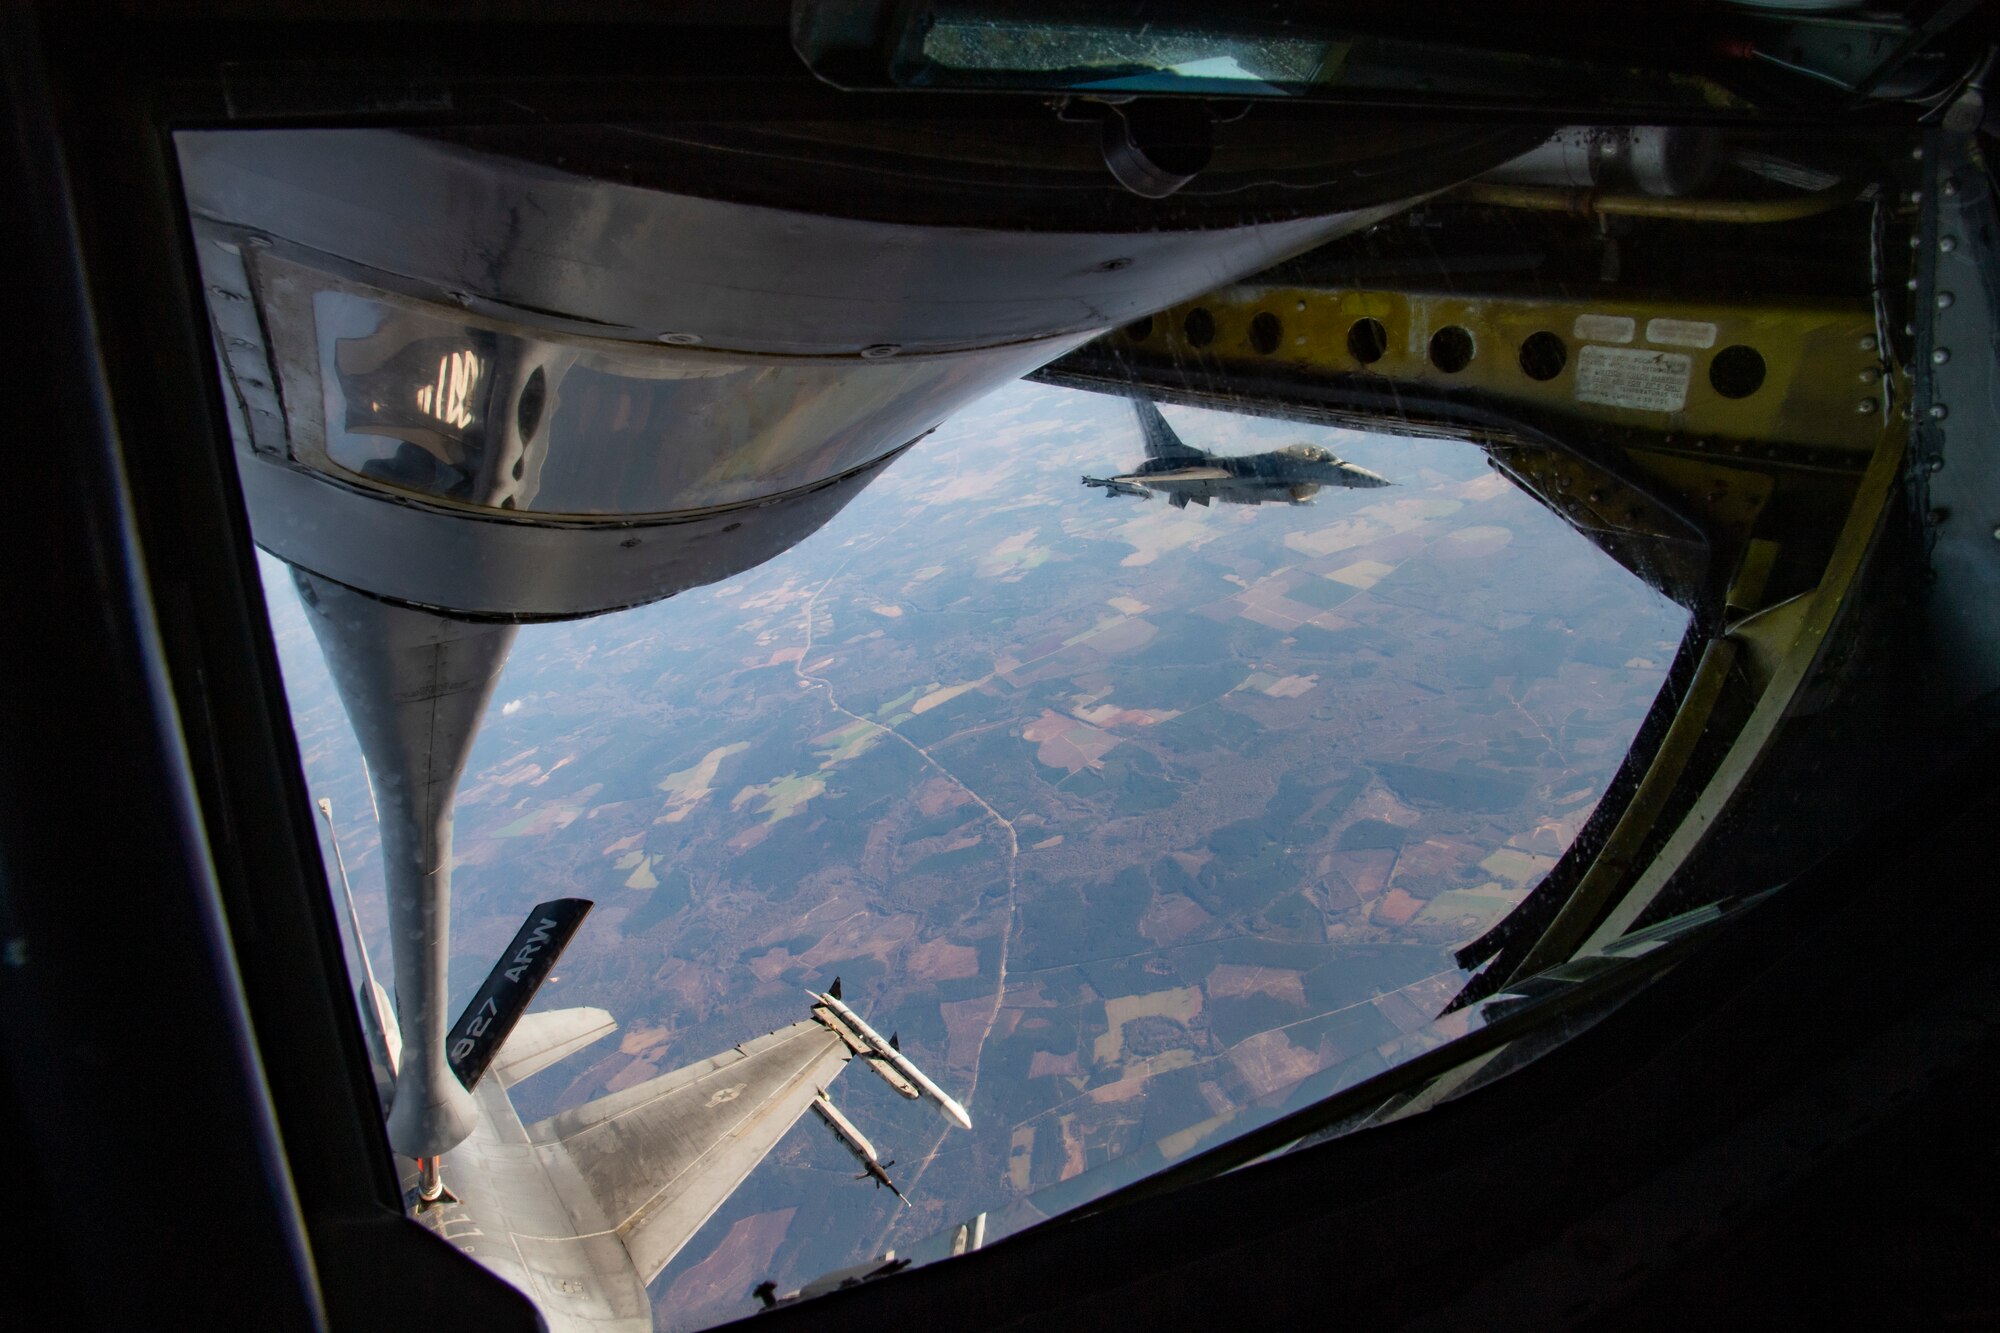 F-16 Fighting Falcon aircraft assigned to Shaw Air Force Base (AFB), South Carolina, fly in formation to receive air refueling support from a KC-135 Stratotanker aircraft assigned to MacDill AFB, Florida, Dec. 1, 2020.